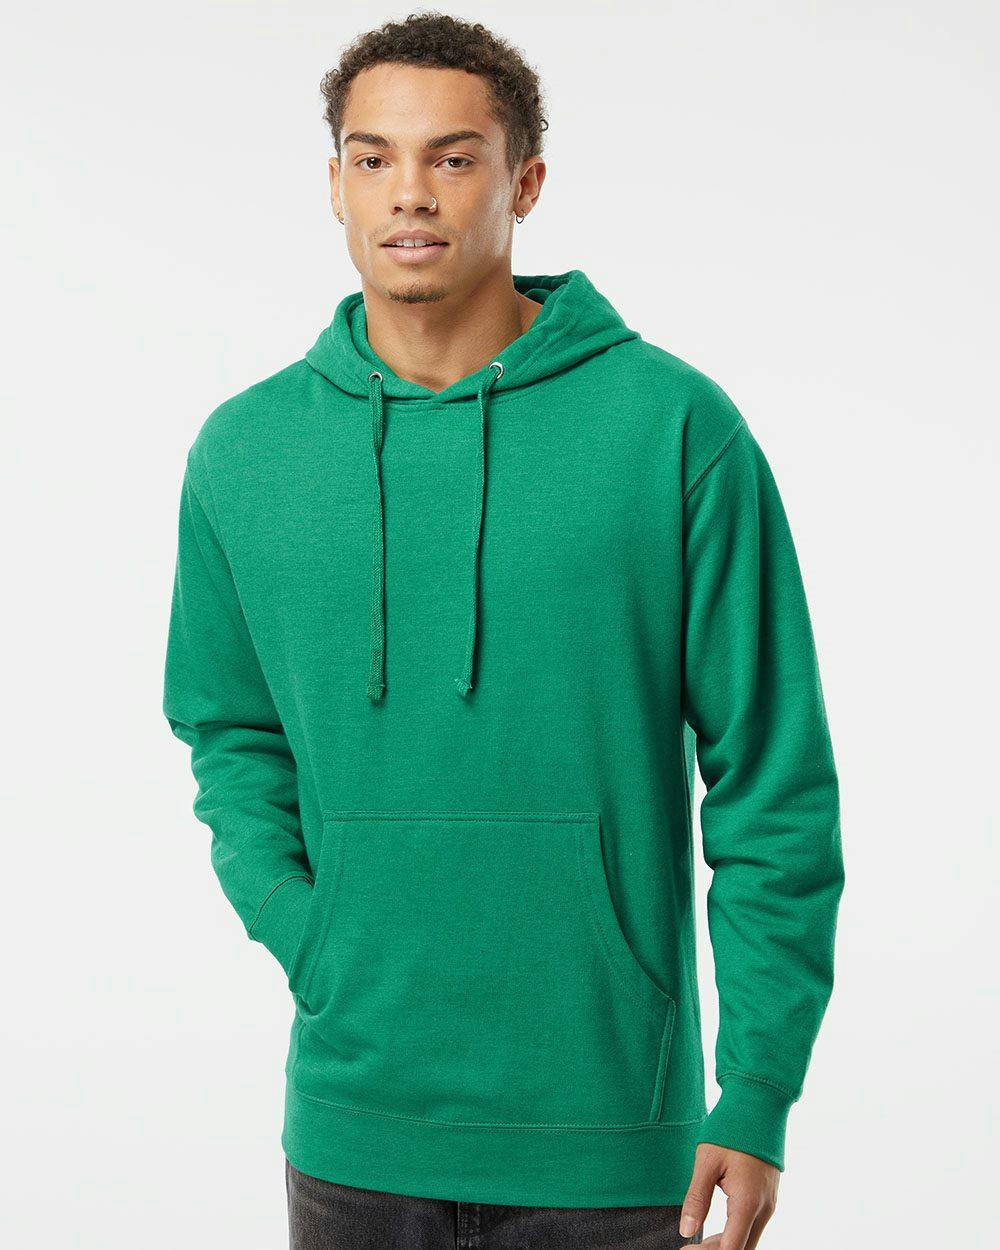 Image for Midweight Hooded Sweatshirt - SS4500